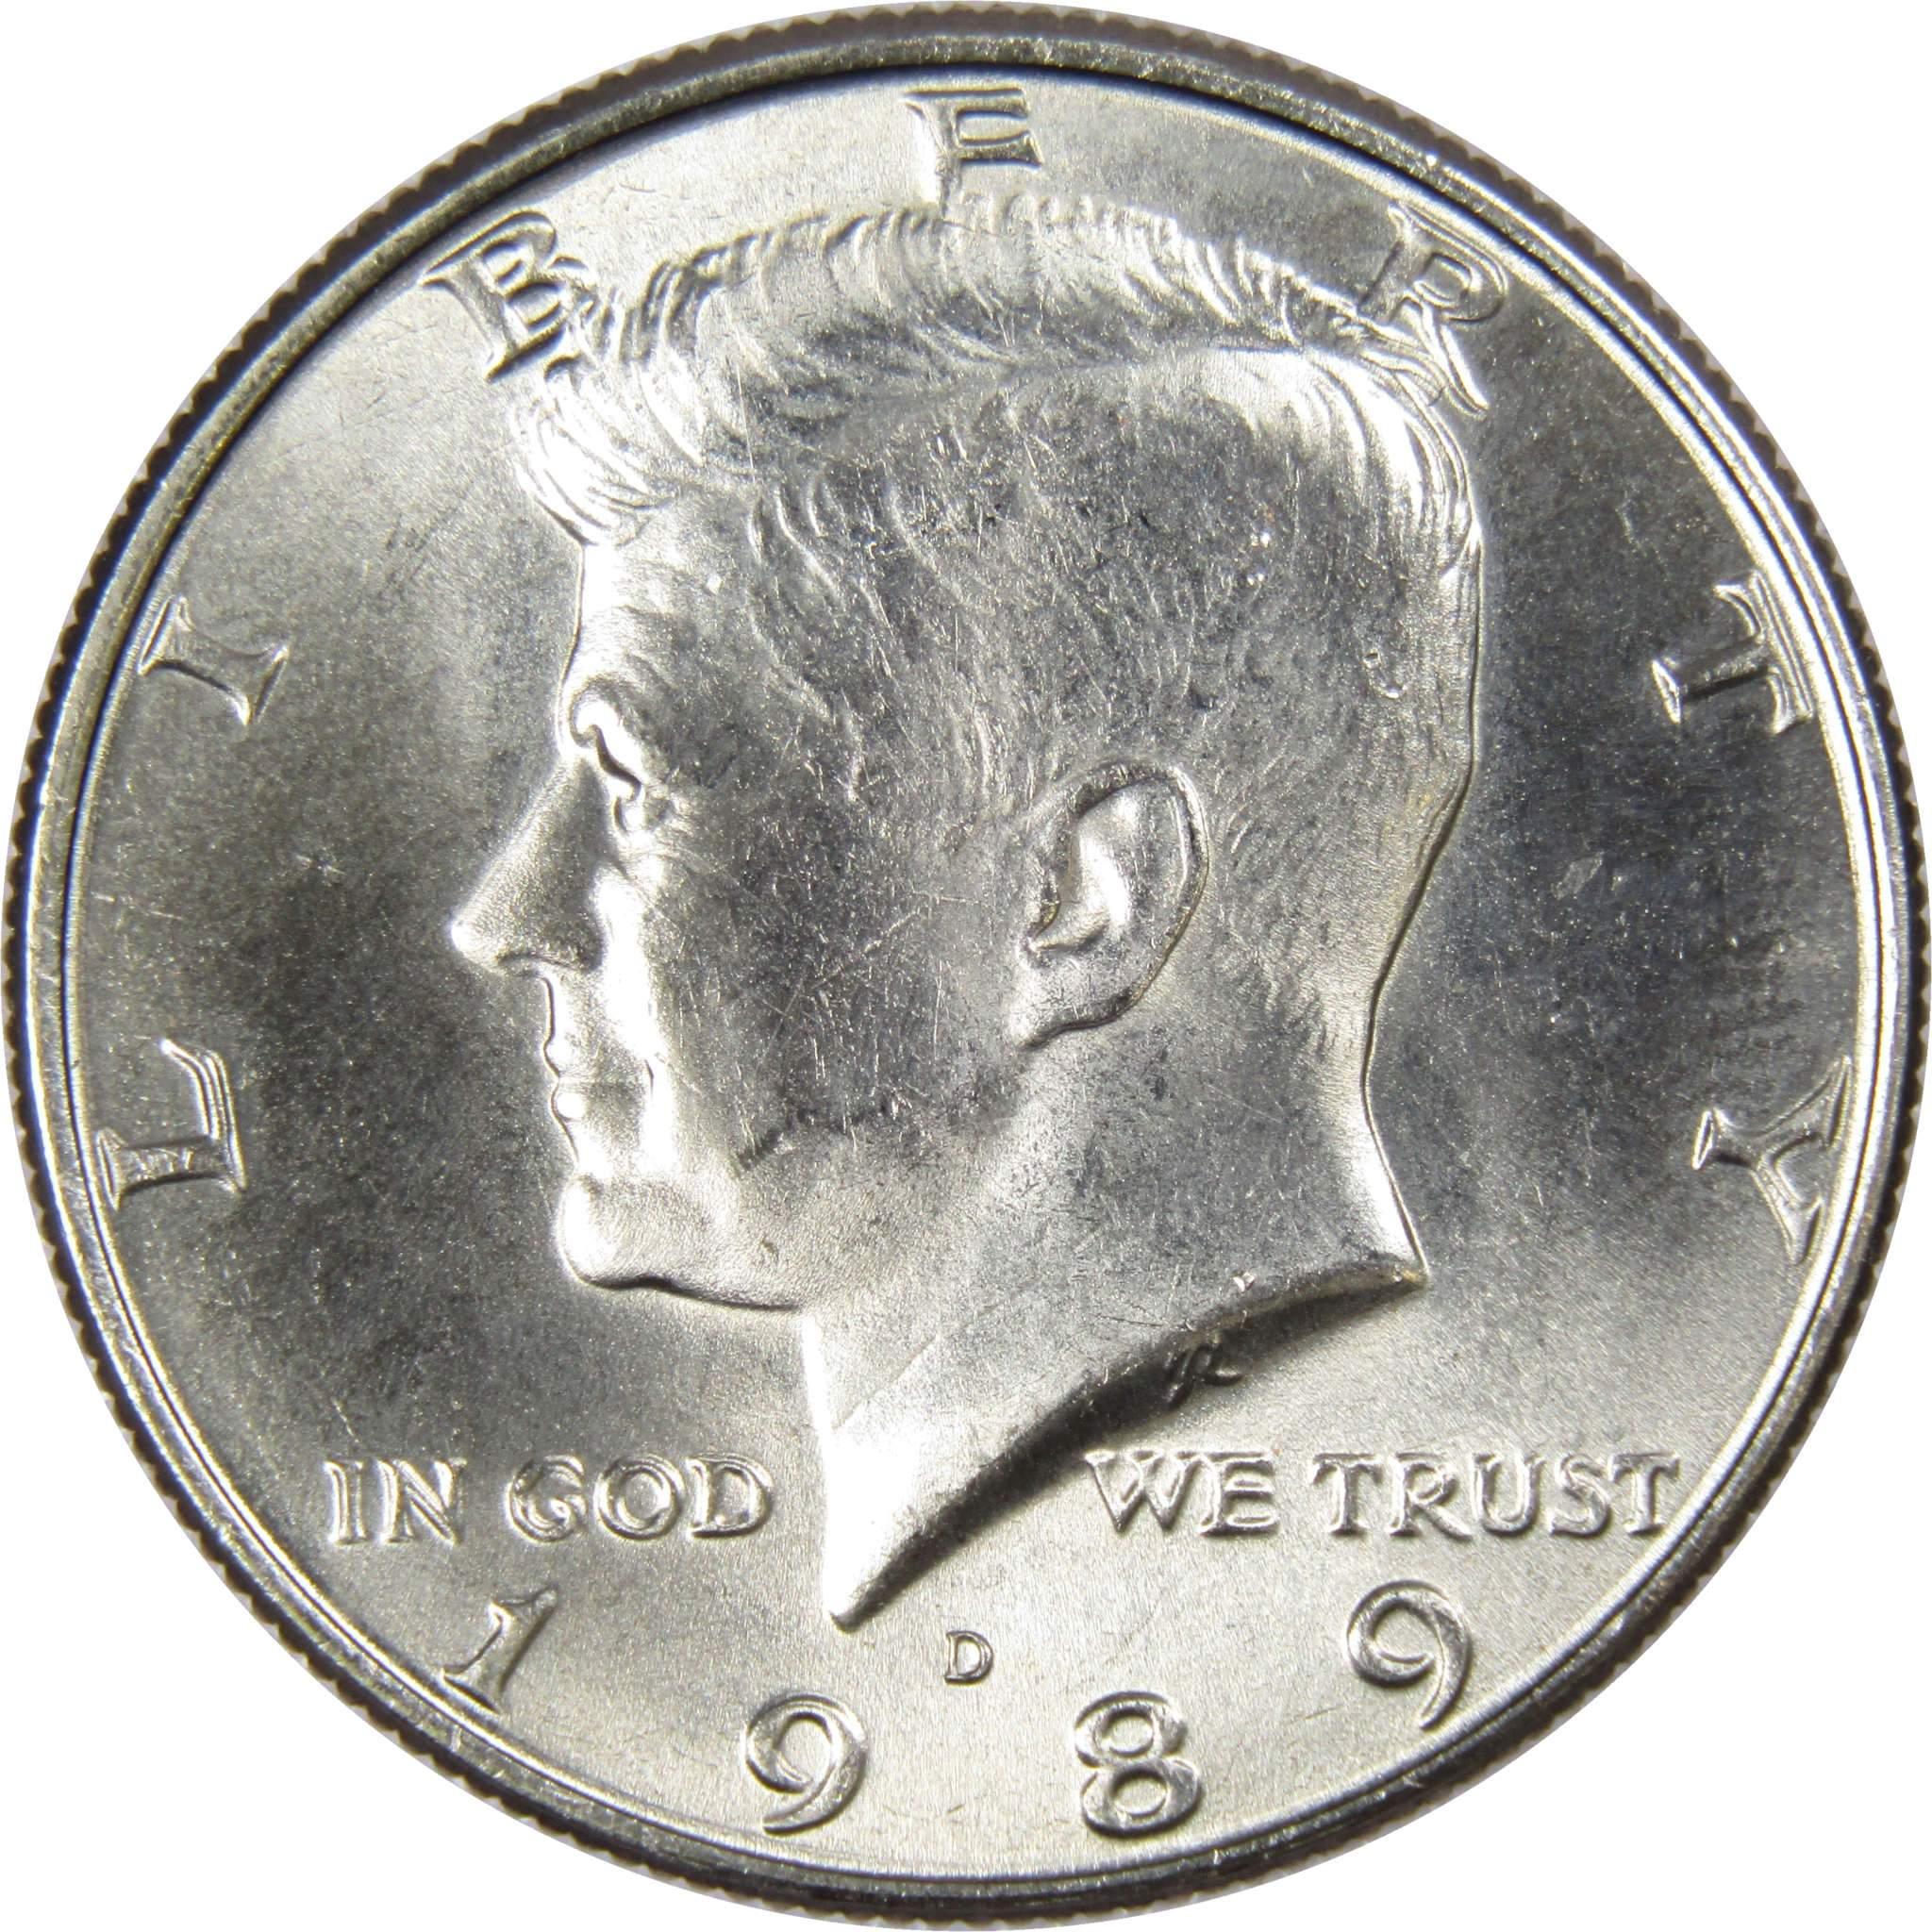 1989 D Kennedy Half Dollar BU Uncirculated Mint State 50c US Coin Collectible